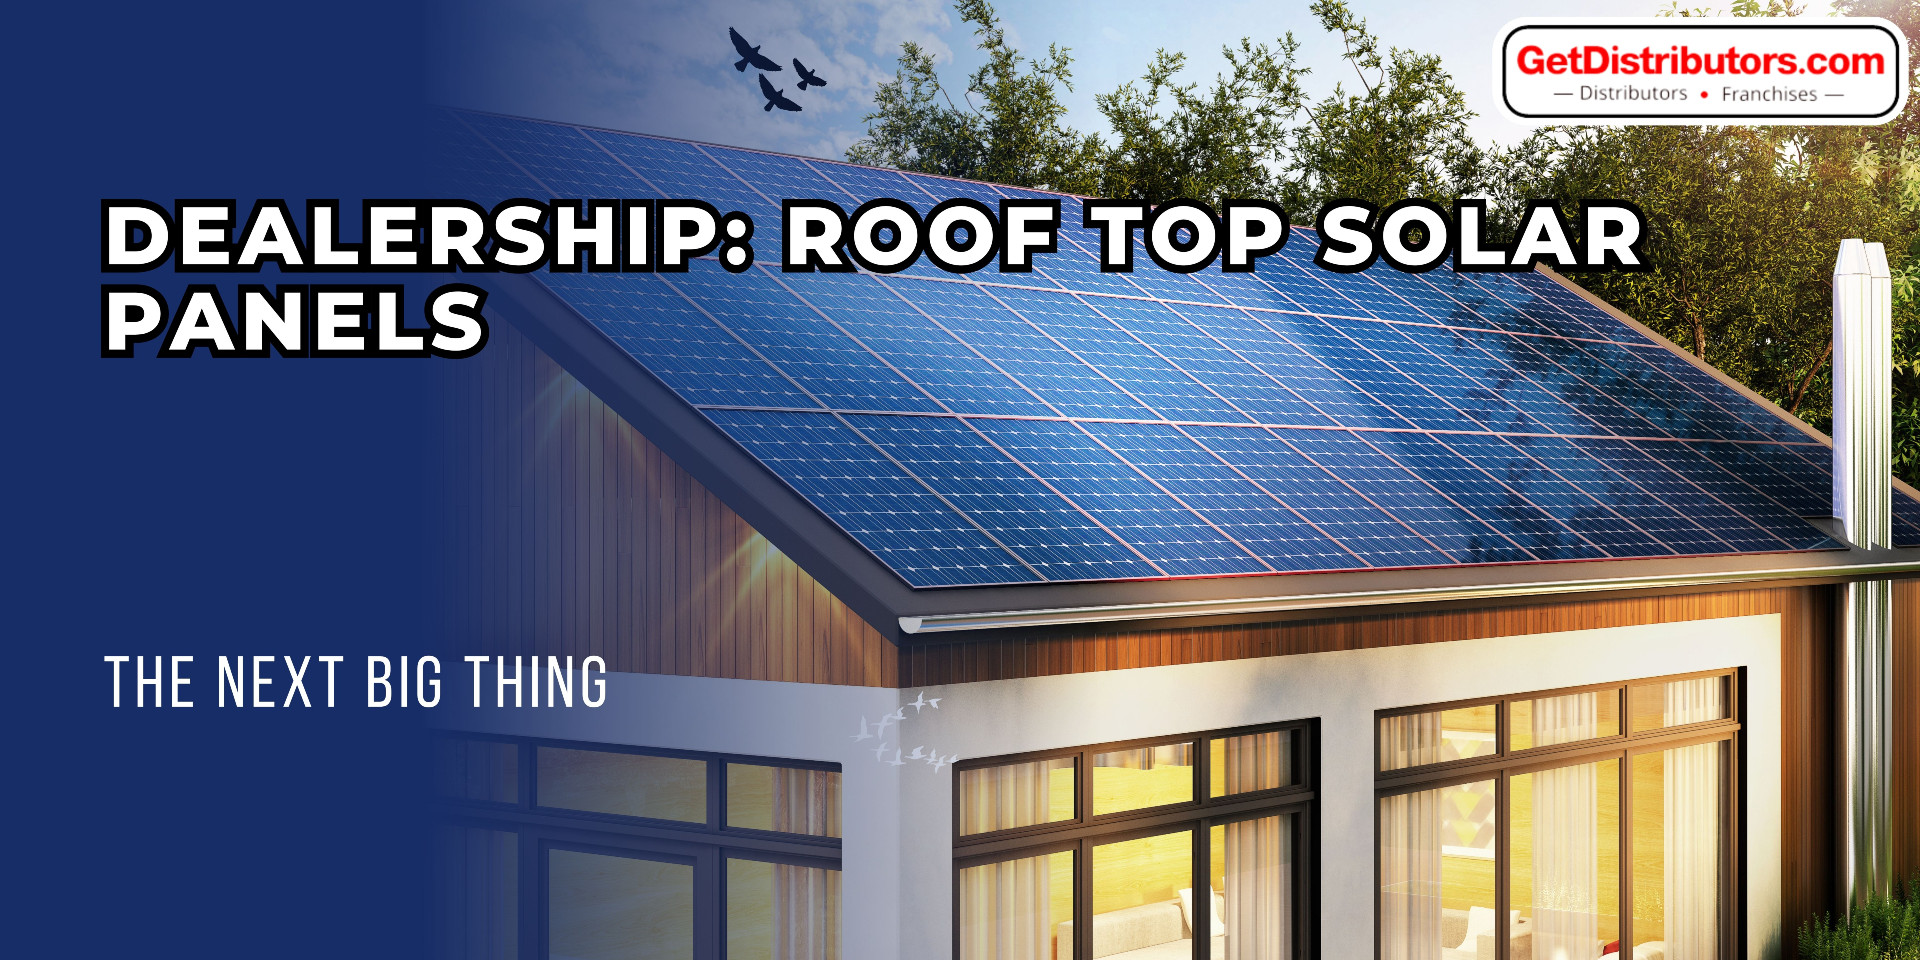 Rooftop solar panels dealership: The next big thing